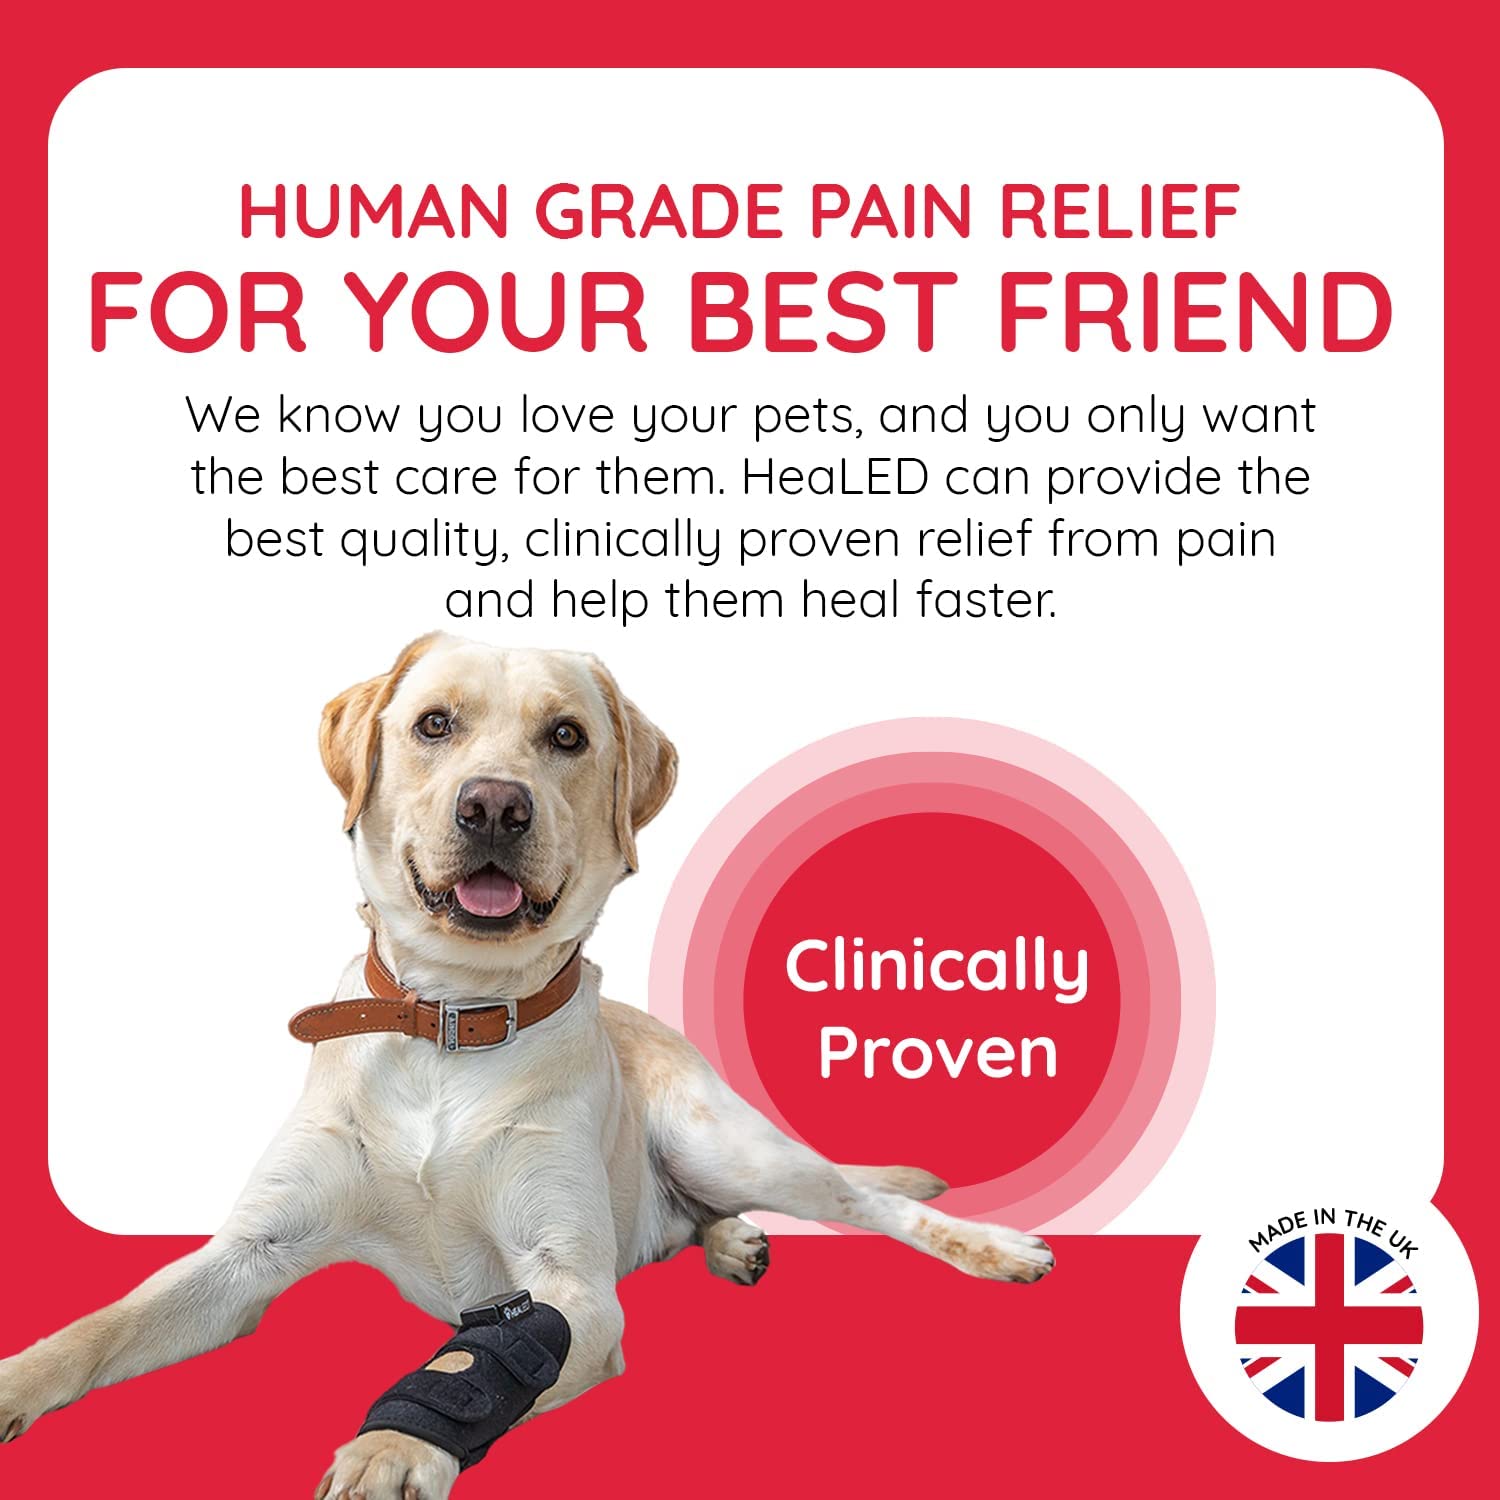 LED technology provides human grade pain relief for your pet